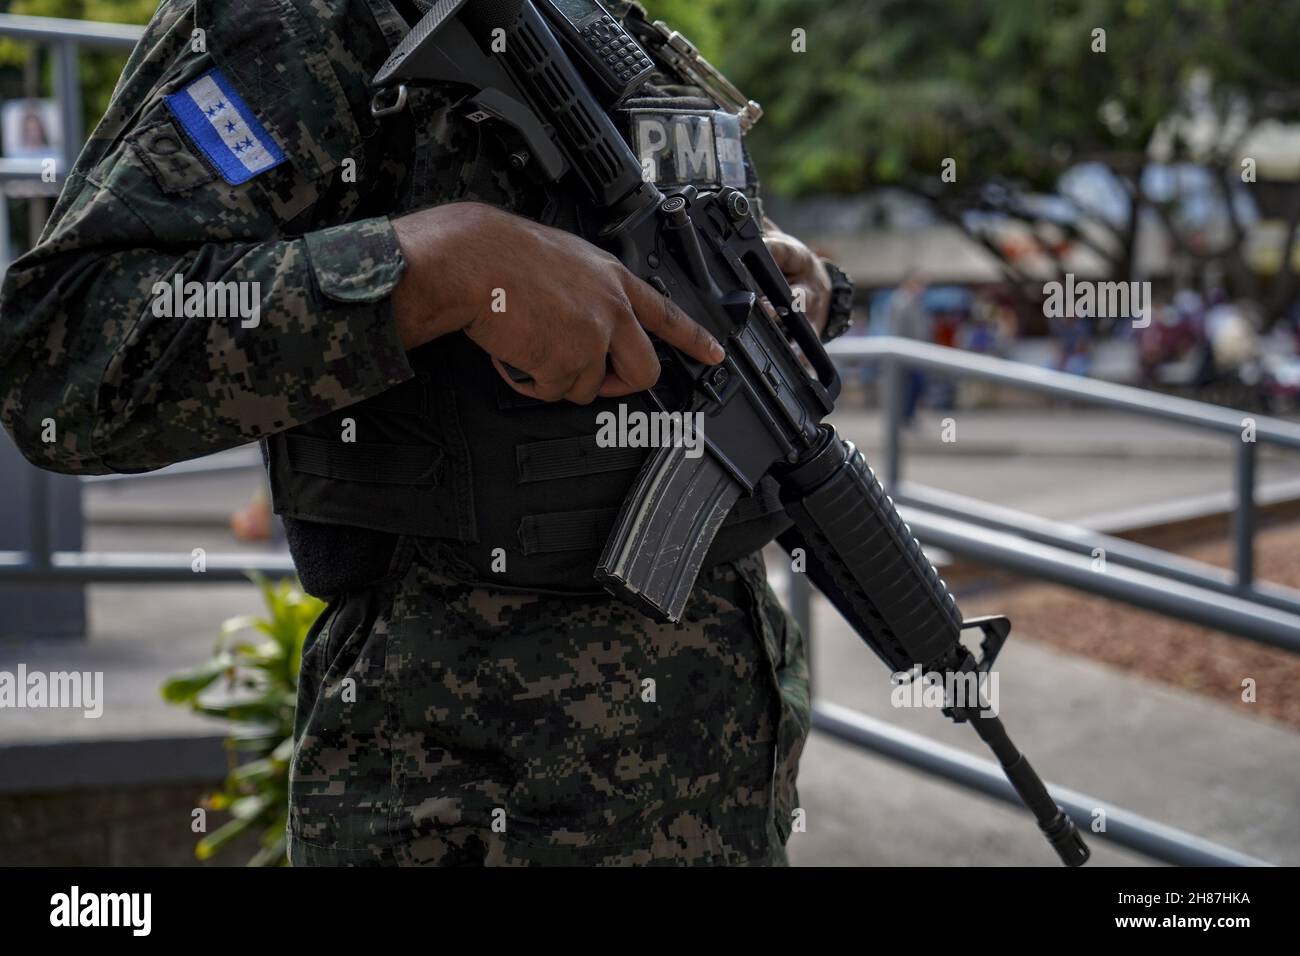 Tegucigalpa, Honduras. 27th Nov, 2021. A soldier stands guard while patrolling downtown Tegucigalpa.The Republic of Honduras will hold general elections to choose a new set of president, congress, and municipal government leaders. (Photo by Camilo Freedman/SOPA Images/Sipa USA) Credit: Sipa USA/Alamy Live News Stock Photo